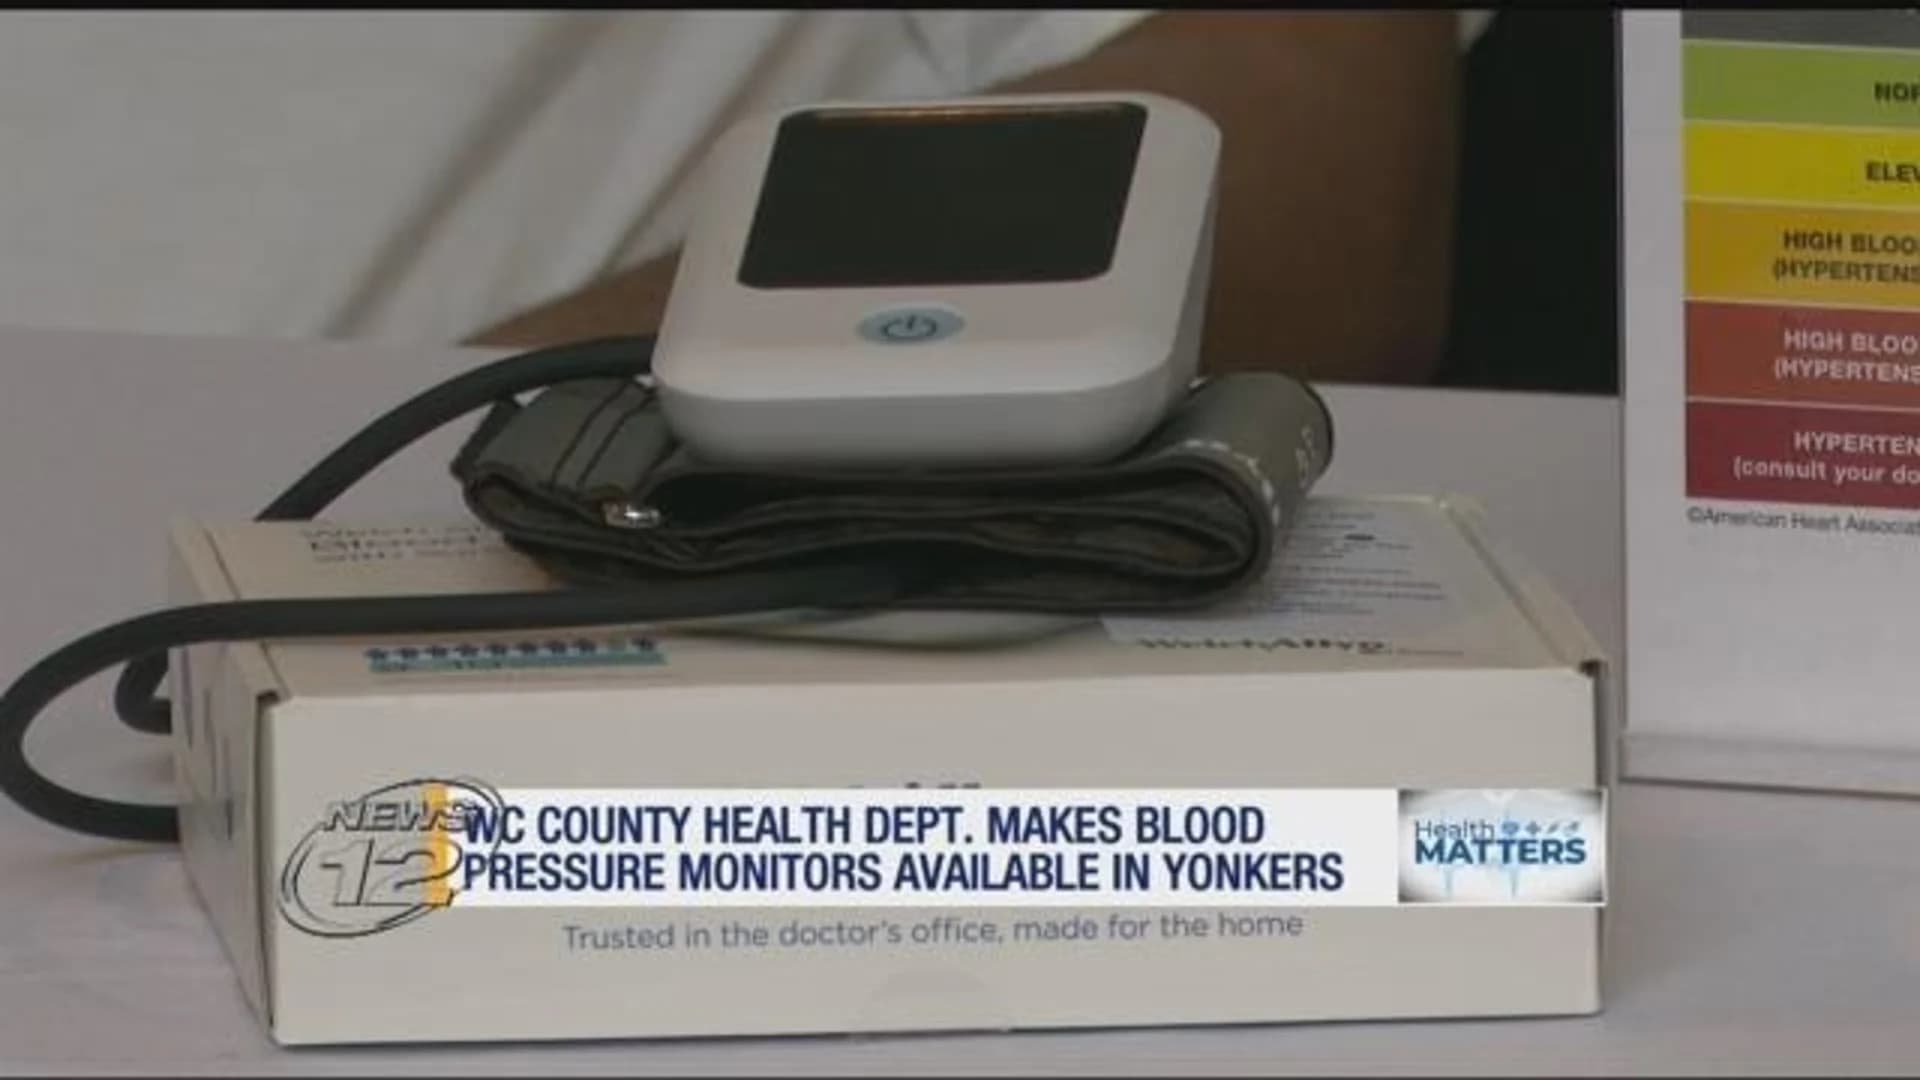 Check it out: Program to offer free blood pressure monitors at library